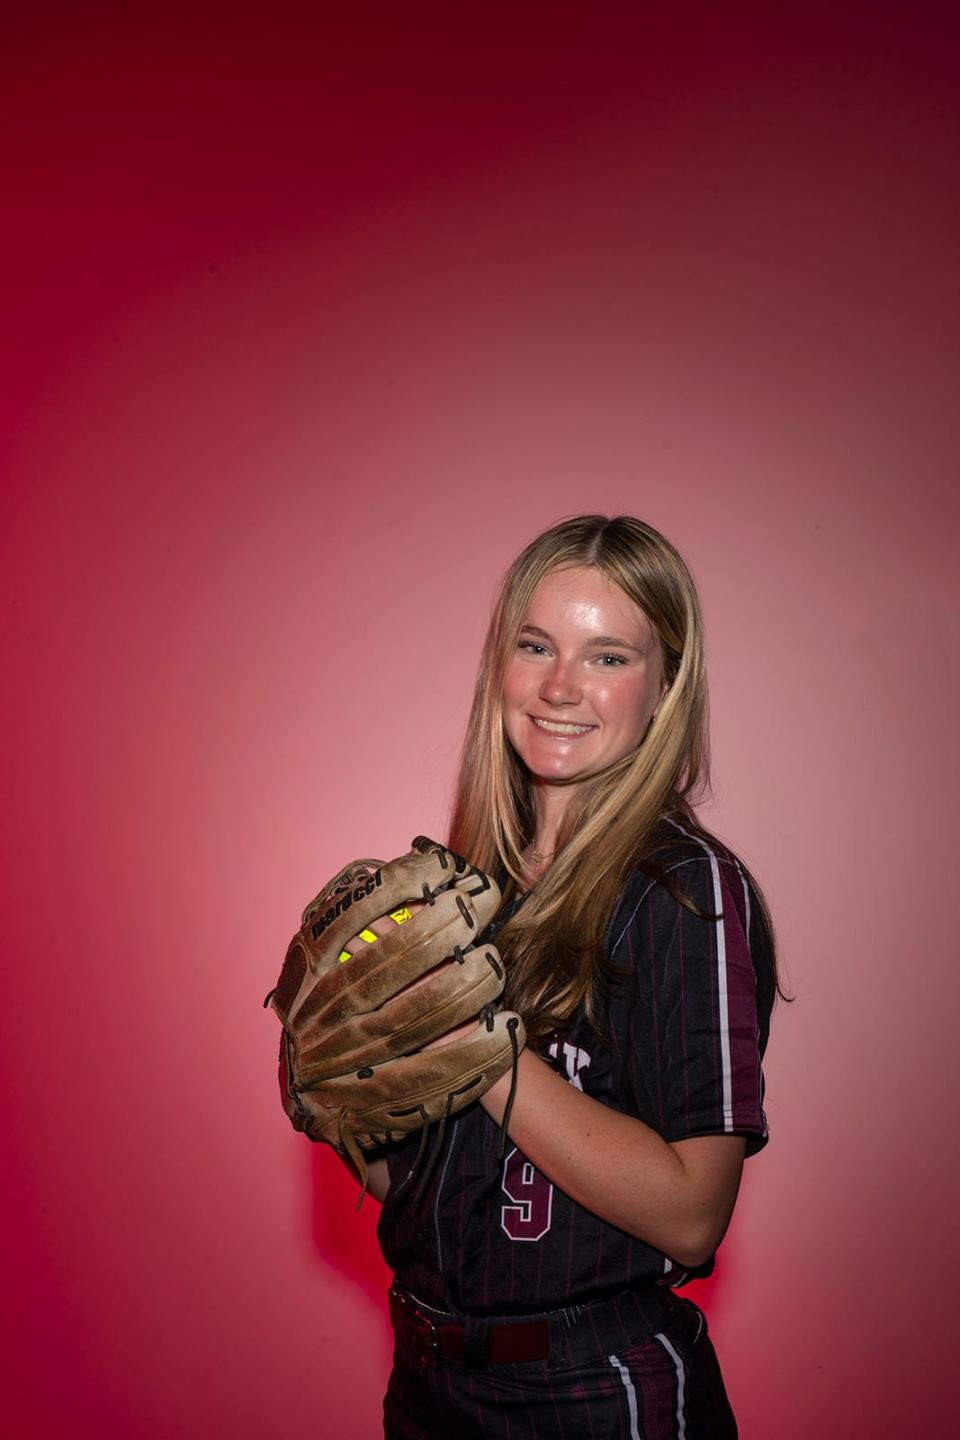 Round Rock's Meghan Merwick enjoys baking with her mother. Her specialty is macarons. Her favorite softball memory is reaching the fourth round of the softball playoffs during her freshman year.